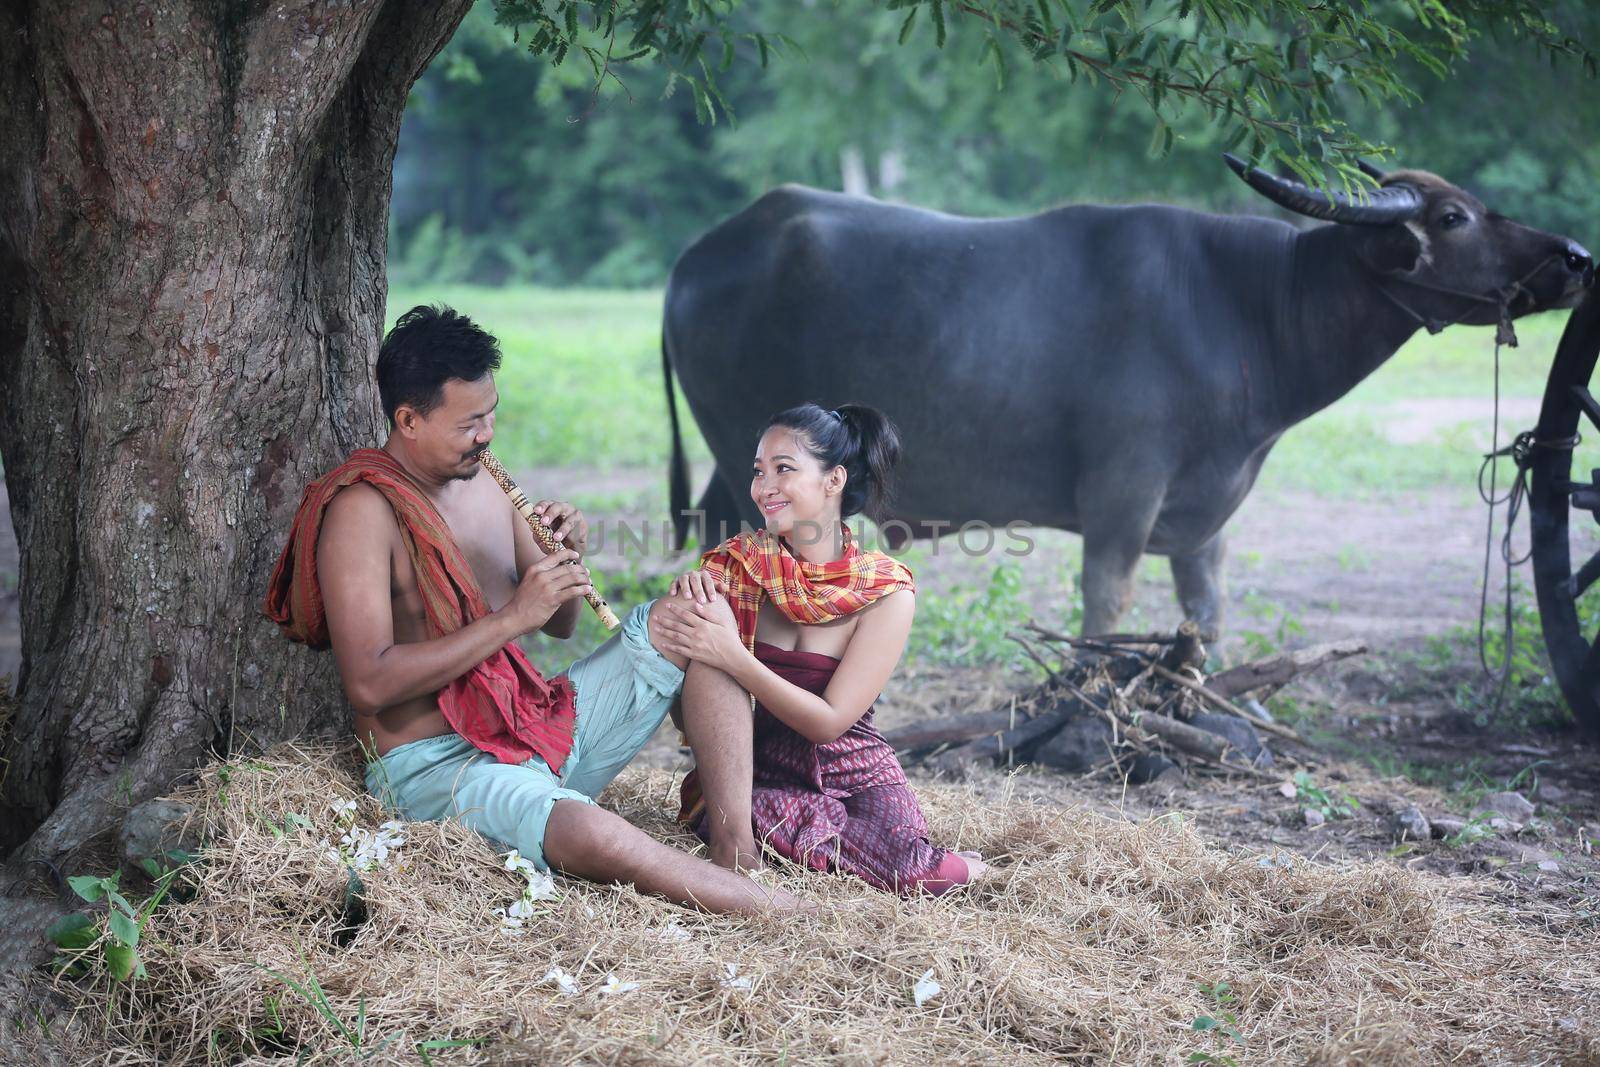 Couple love of Asian Young man and women sitting under tree against buffalo and natural background, rural way of life in the Northeast of Thailand. A young man was blowing a bamboo mouth organ to his lover.